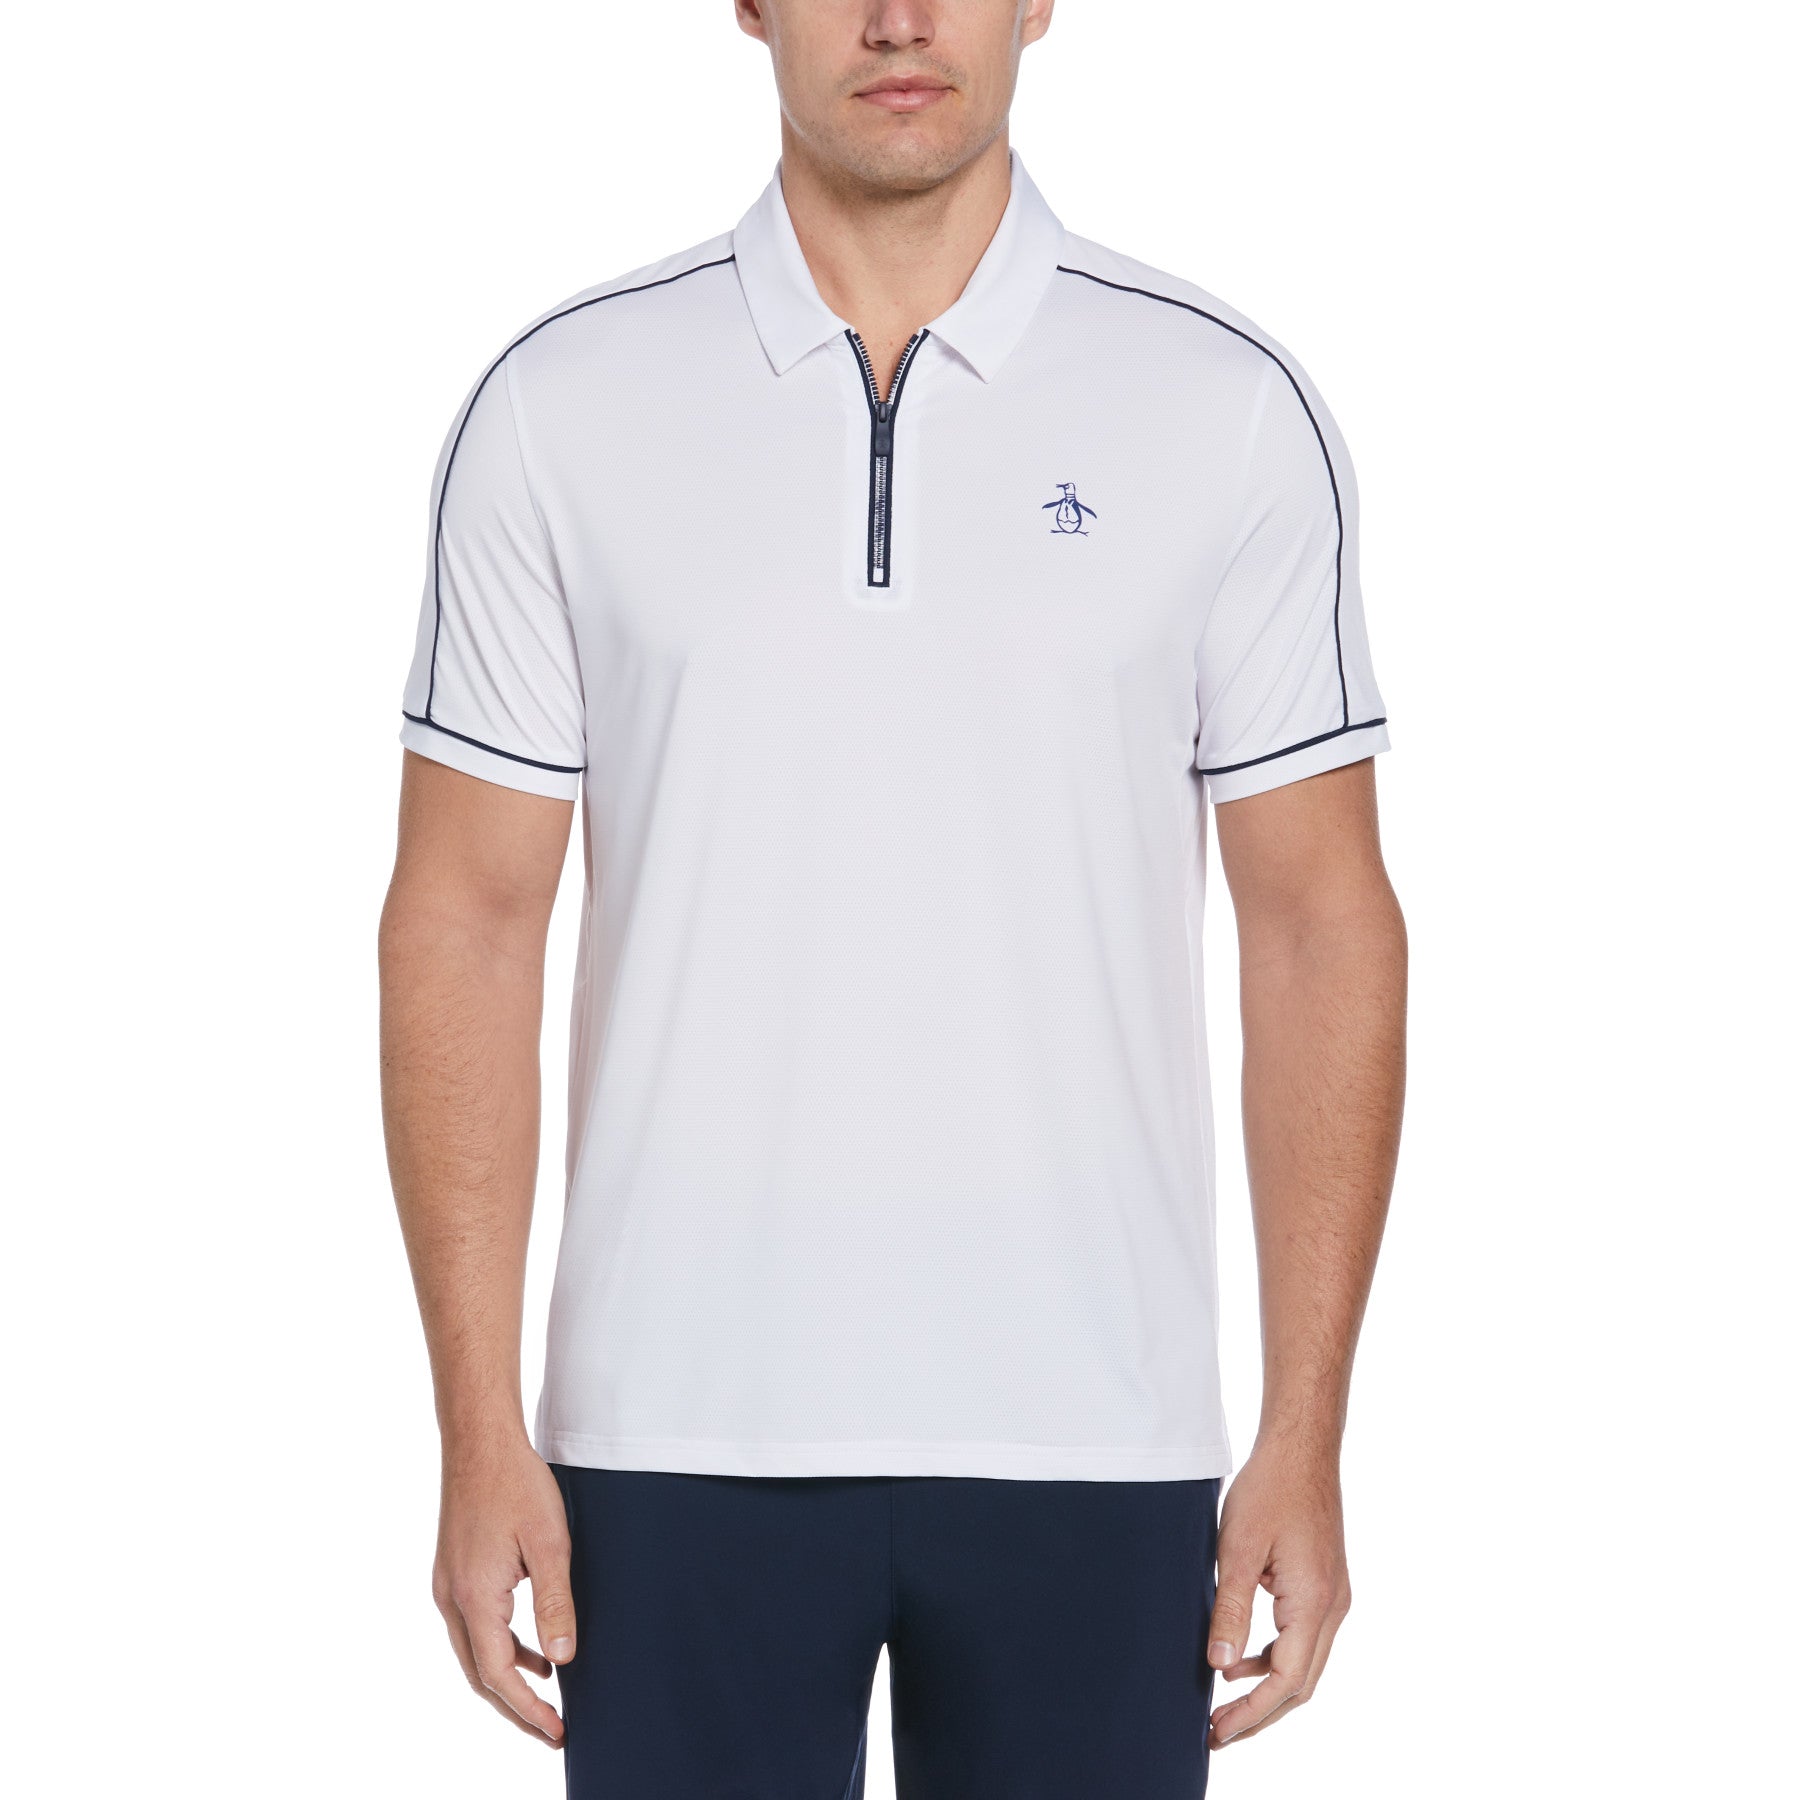 View Piped Performance Quarter Zip Tennis Polo Shirt In Bright White information